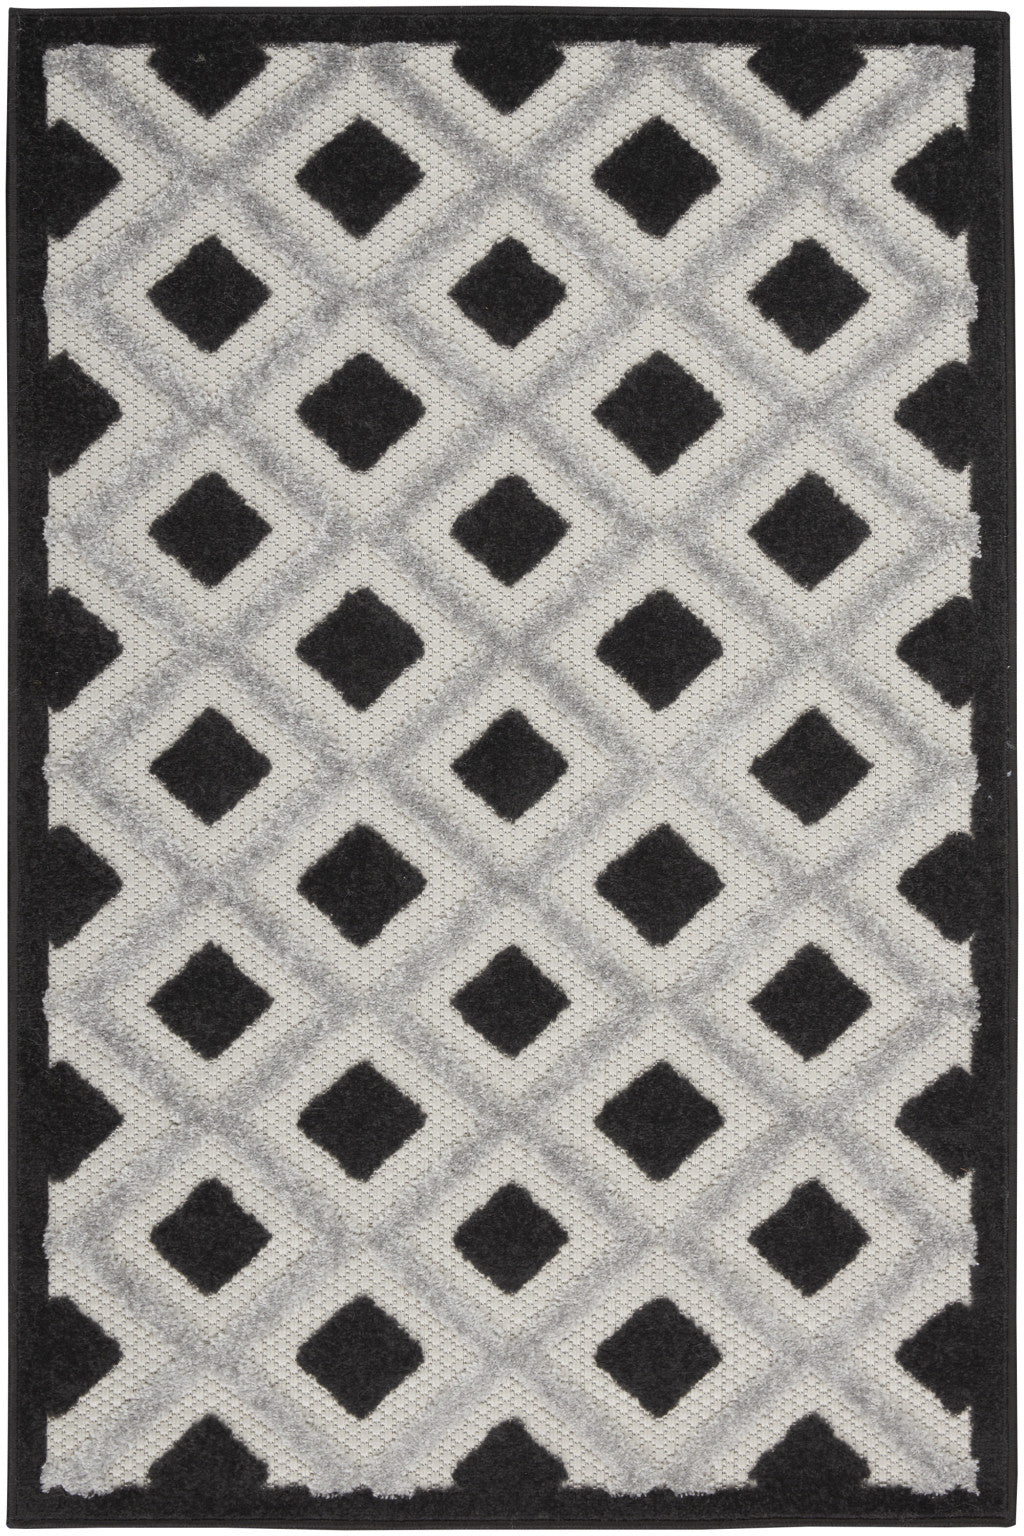 3' X 4' Black And White Gingham Non Skid Indoor Outdoor Area Rug